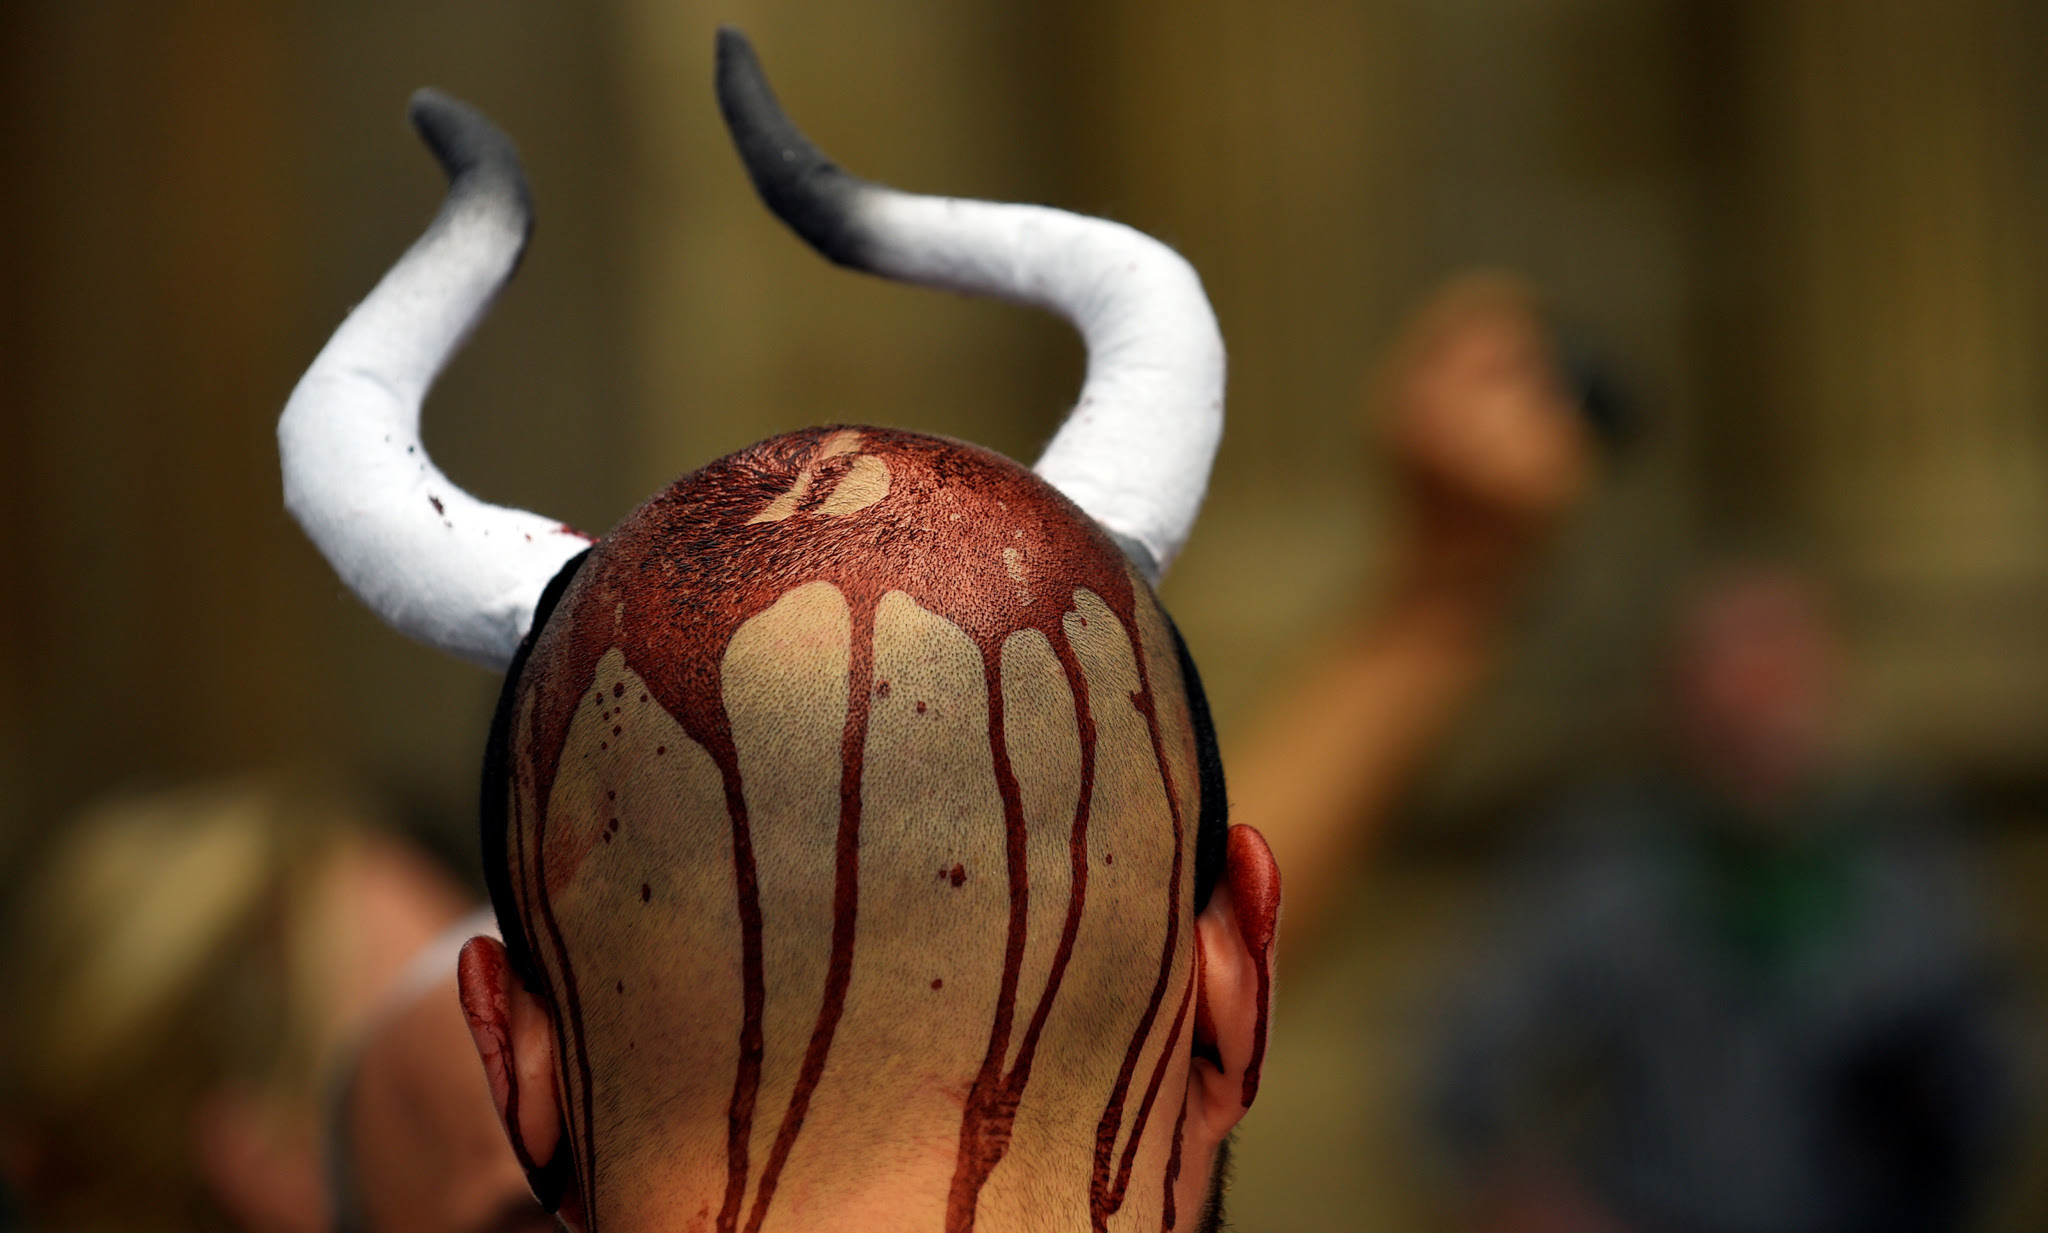 An animal rights protester covered in fake blood demonstrate for the abolition of bull runs and bullfights a day before the start of the famous running of the bulls San Fermin festival in Pamplona, northern Spain